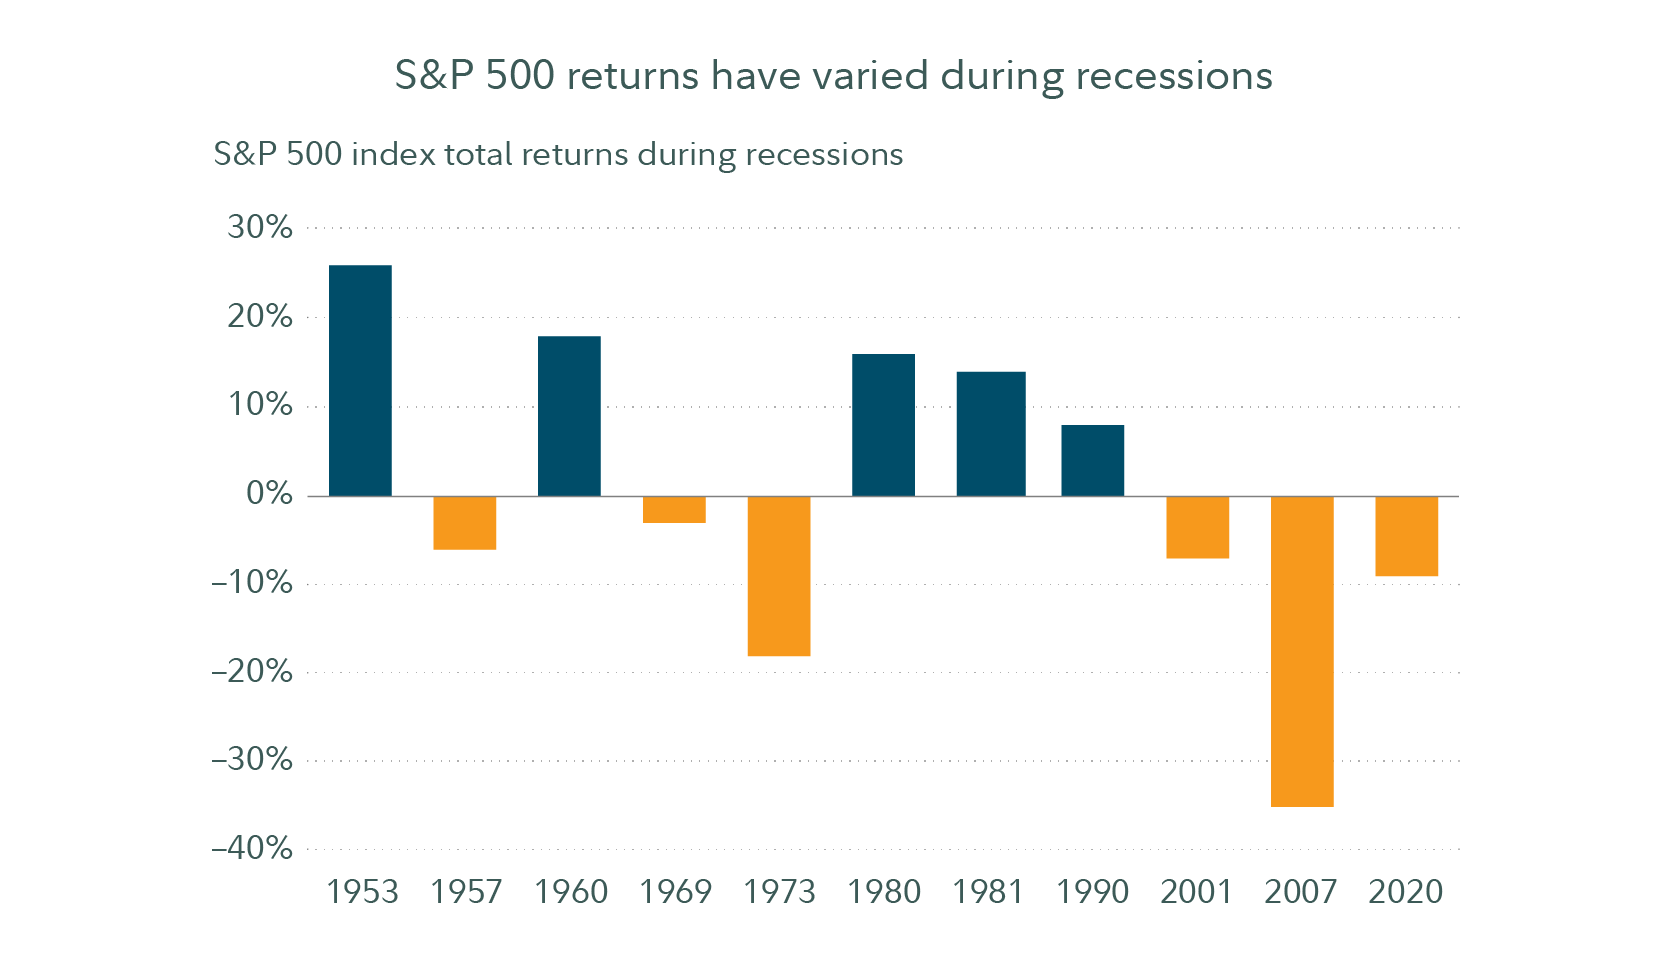 Between 1950 and 2022, 5 of the last 11 recessions have led to positive total returns for the S&P 500 index.